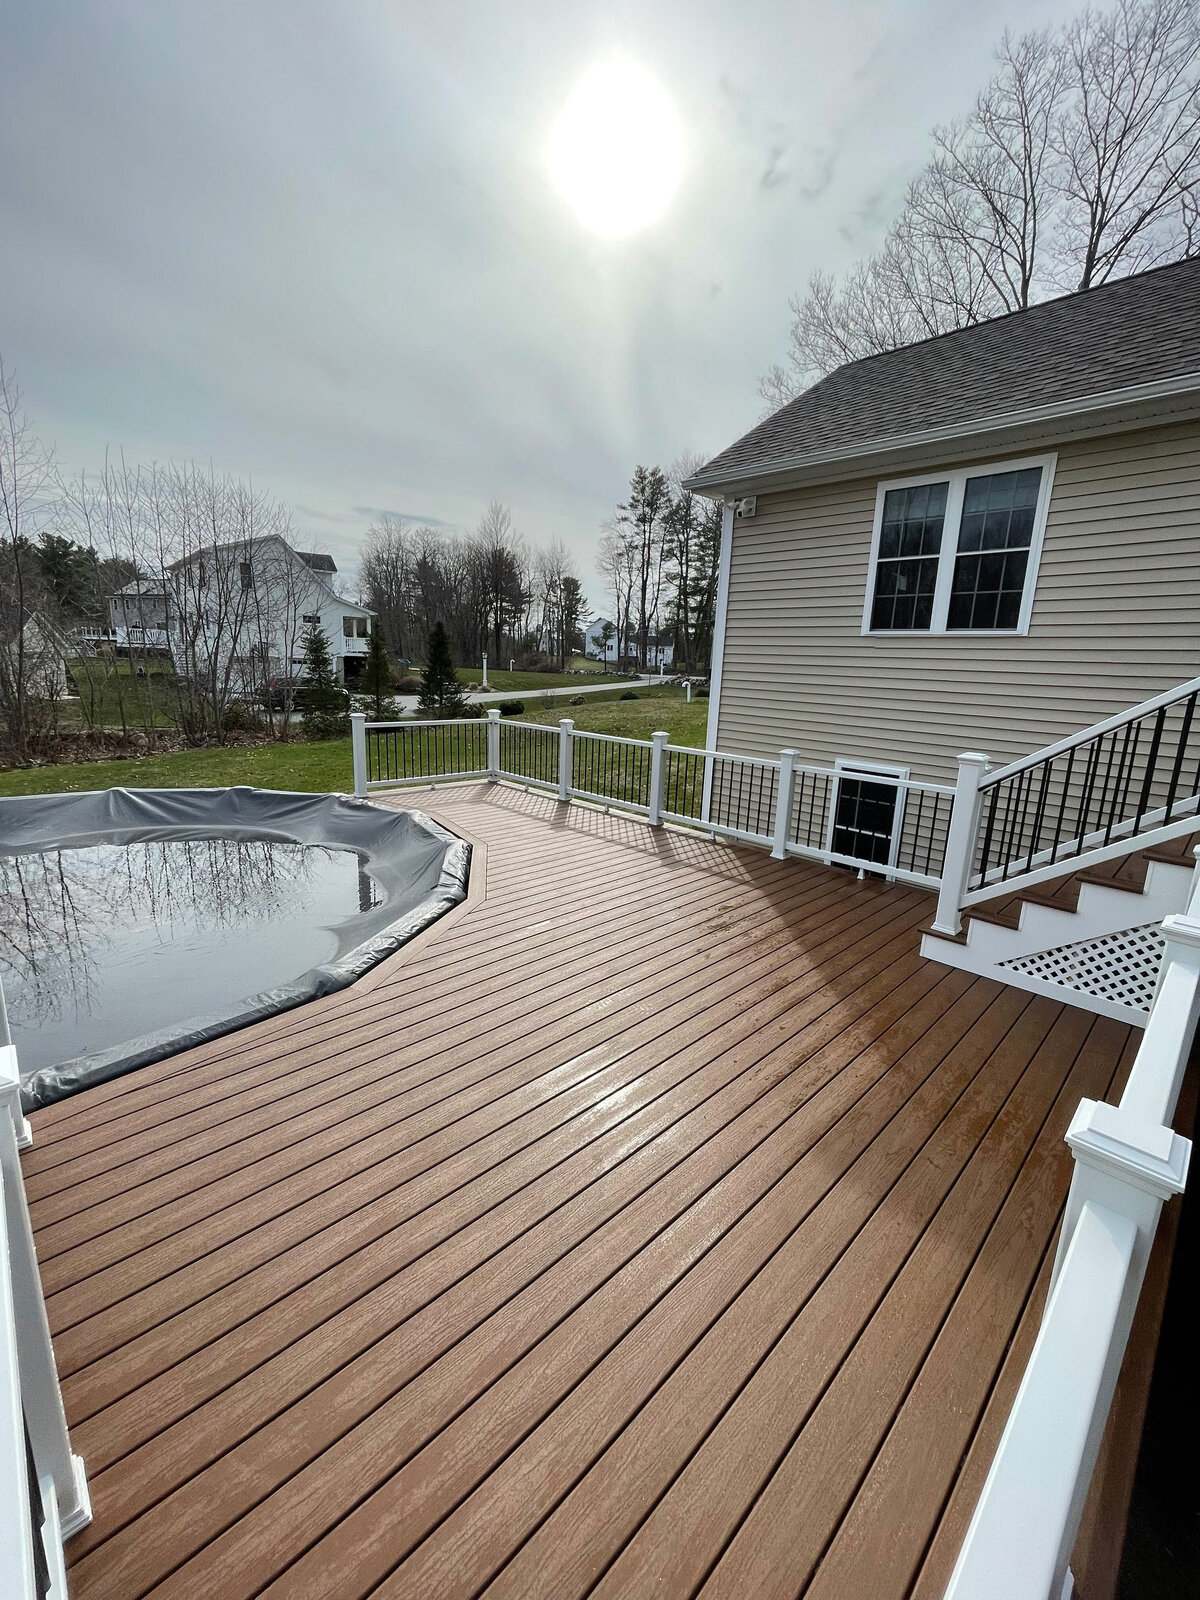 A view from an above ground pool deck with stairs leading up to the house entrance